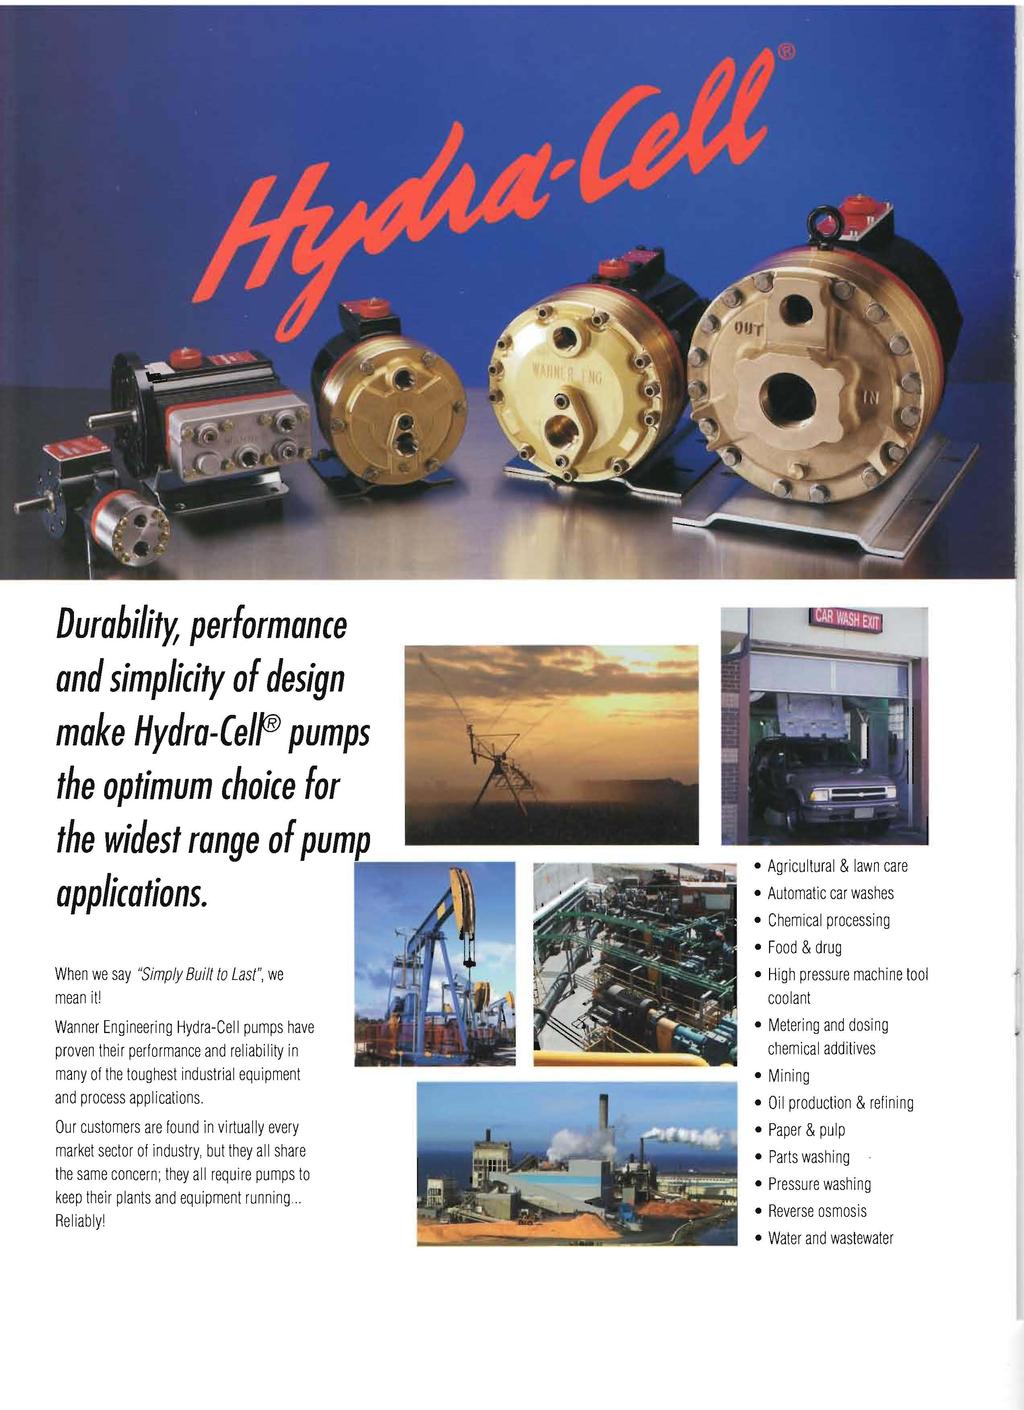 Durability, performance and simplicity of design make Hydra-CelfB pumps the optimum choice for the widest range of pum applications. When we say "Simply Built to Last", we mean it!